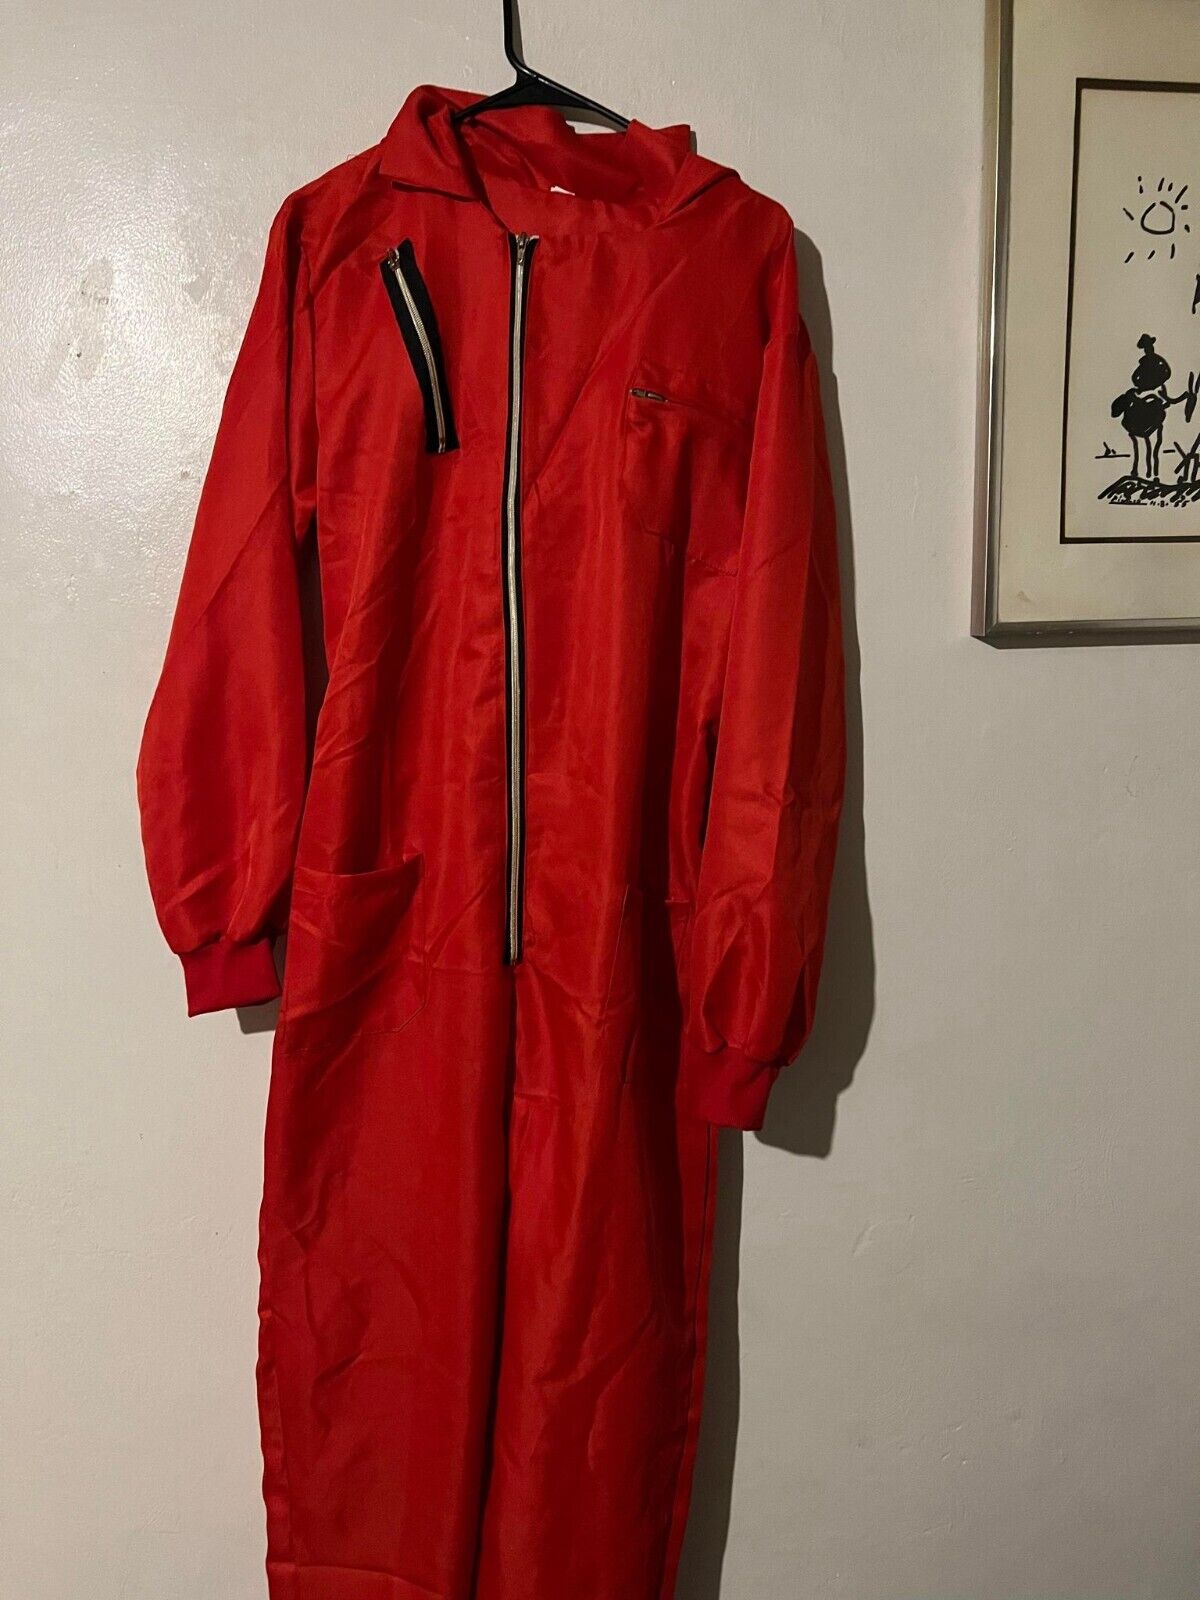 Money Heist Jumpsuit and Mask Costume Adult Mens US Size S/M